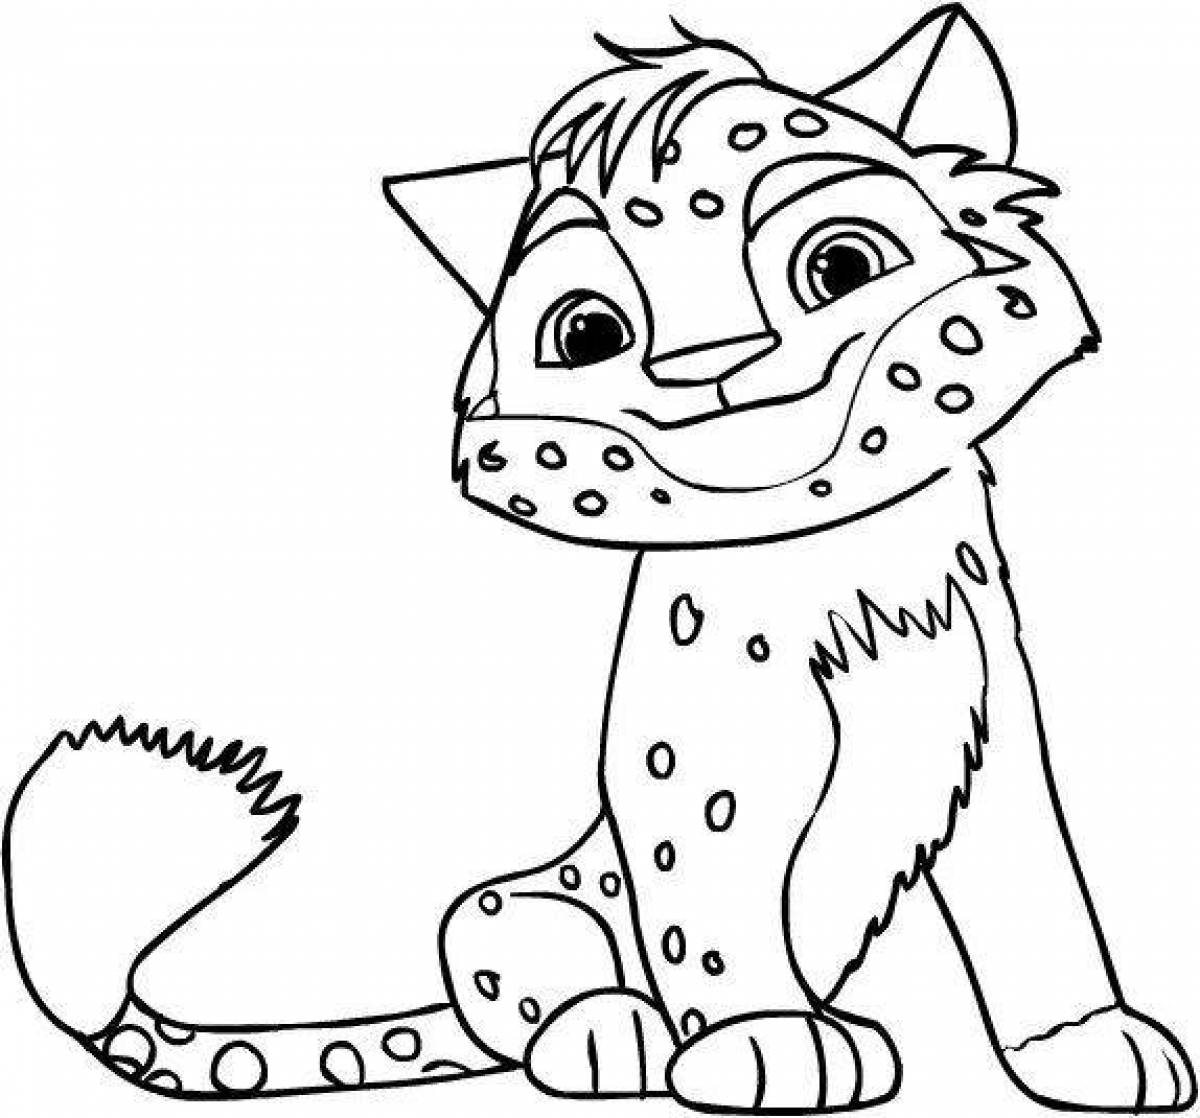 Impressive tiger and lion coloring page